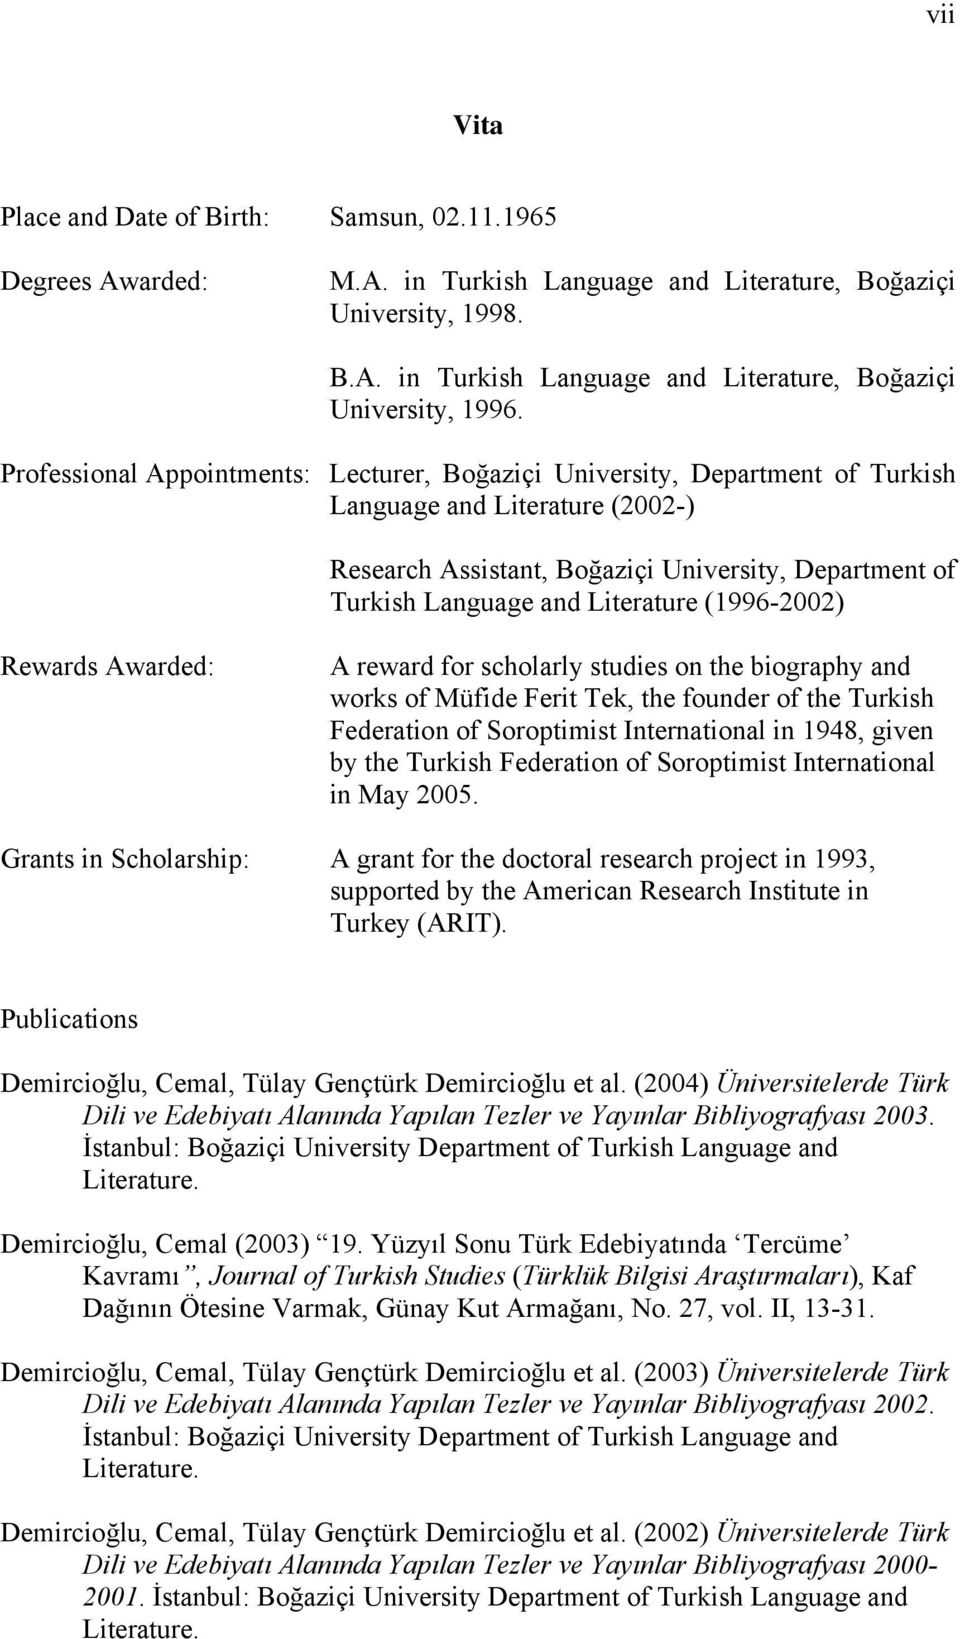 (1996-2002) Rewards Awarded: A reward for scholarly studies on the biography and works of Müfide Ferit Tek, the founder of the Turkish Federation of Soroptimist International in 1948, given by the